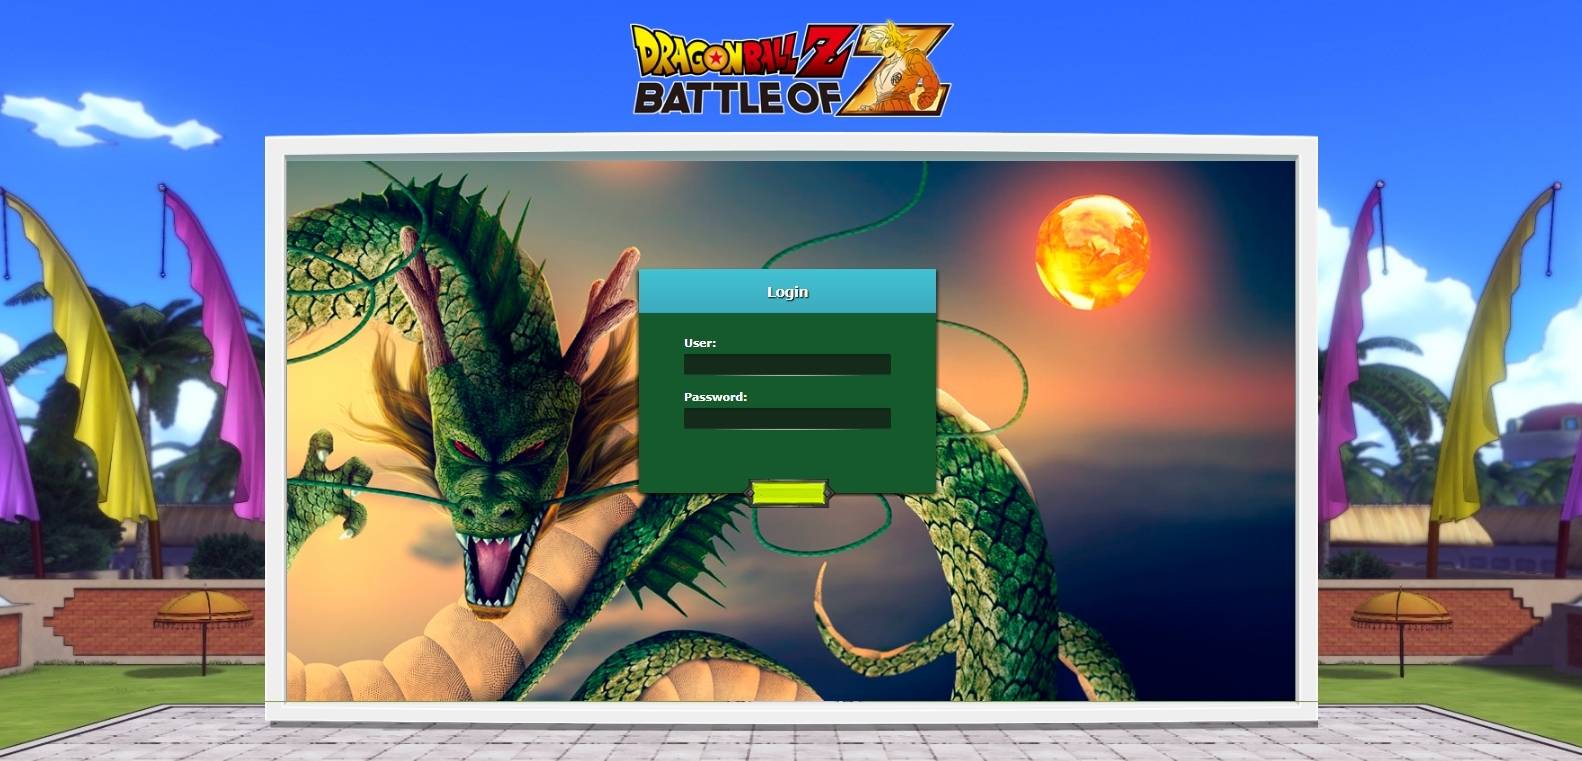 df201db6ea9638f19d09ad11e7e33287 - New DragonBall Browser Game from scratch - RaGEZONE Forums